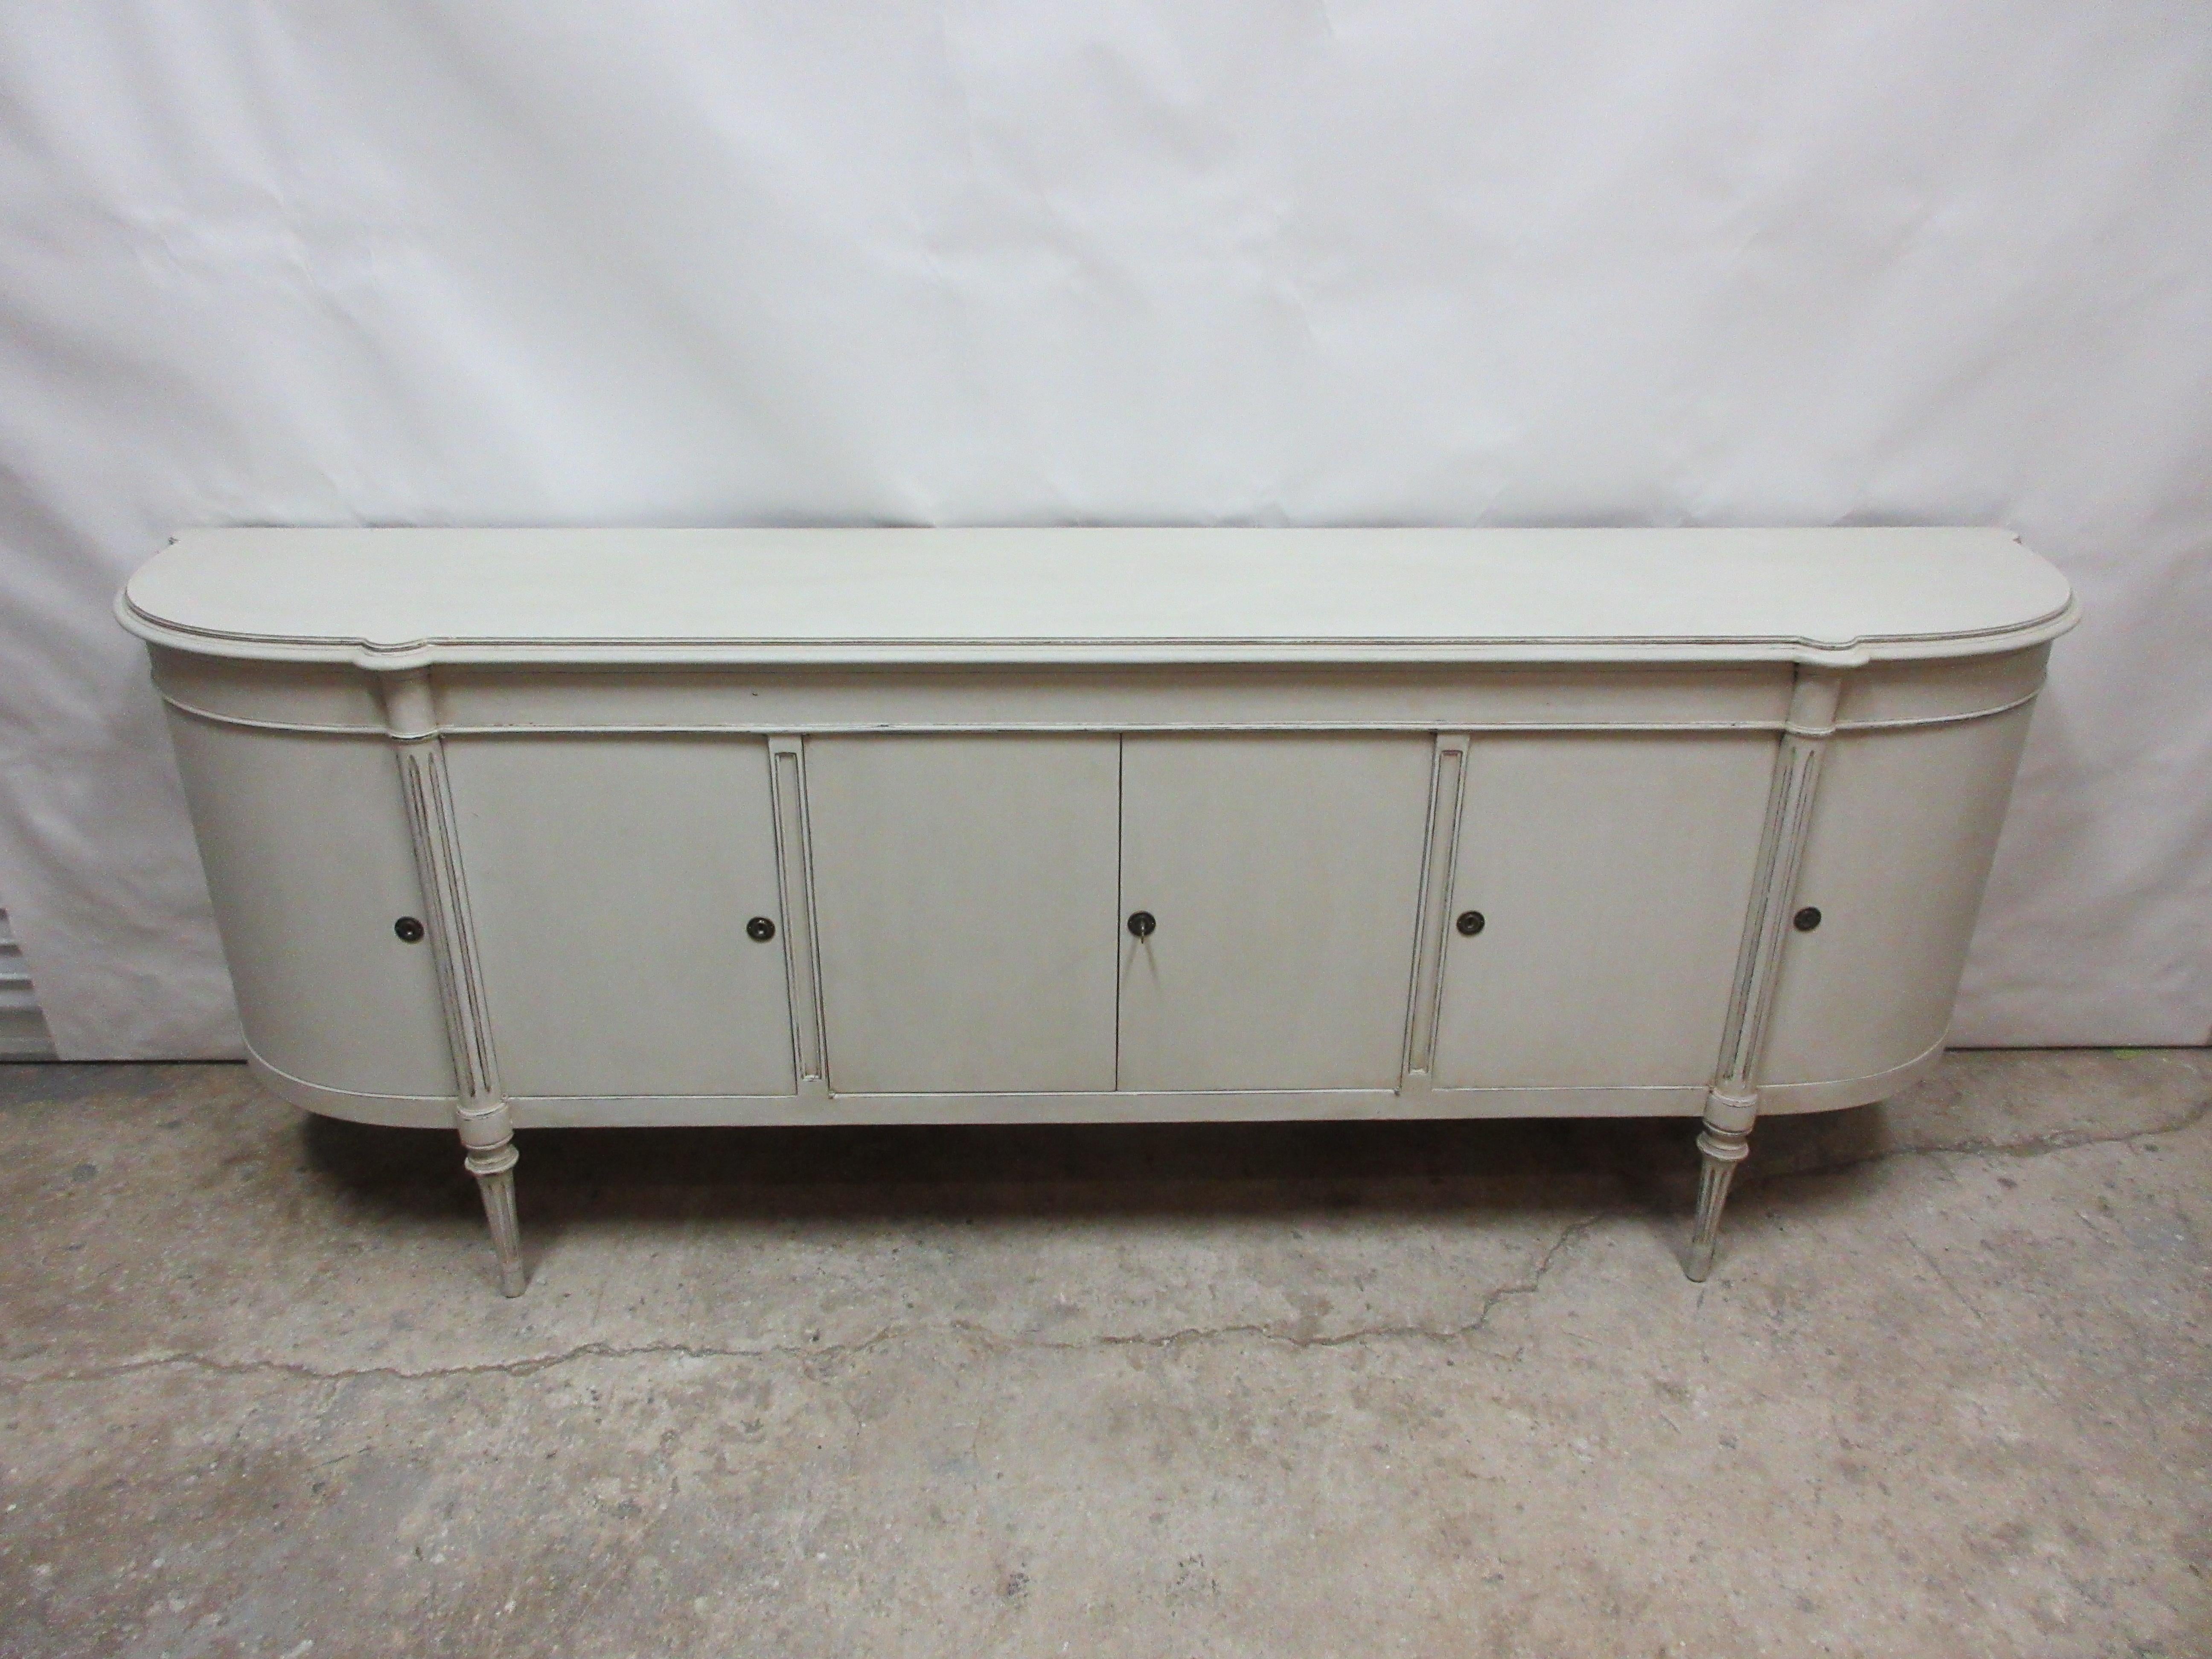 This Gustavian Sideboard was found at an Estate Auction in Stockholm Sweden. it has been restored and repainted in Milk Paints 